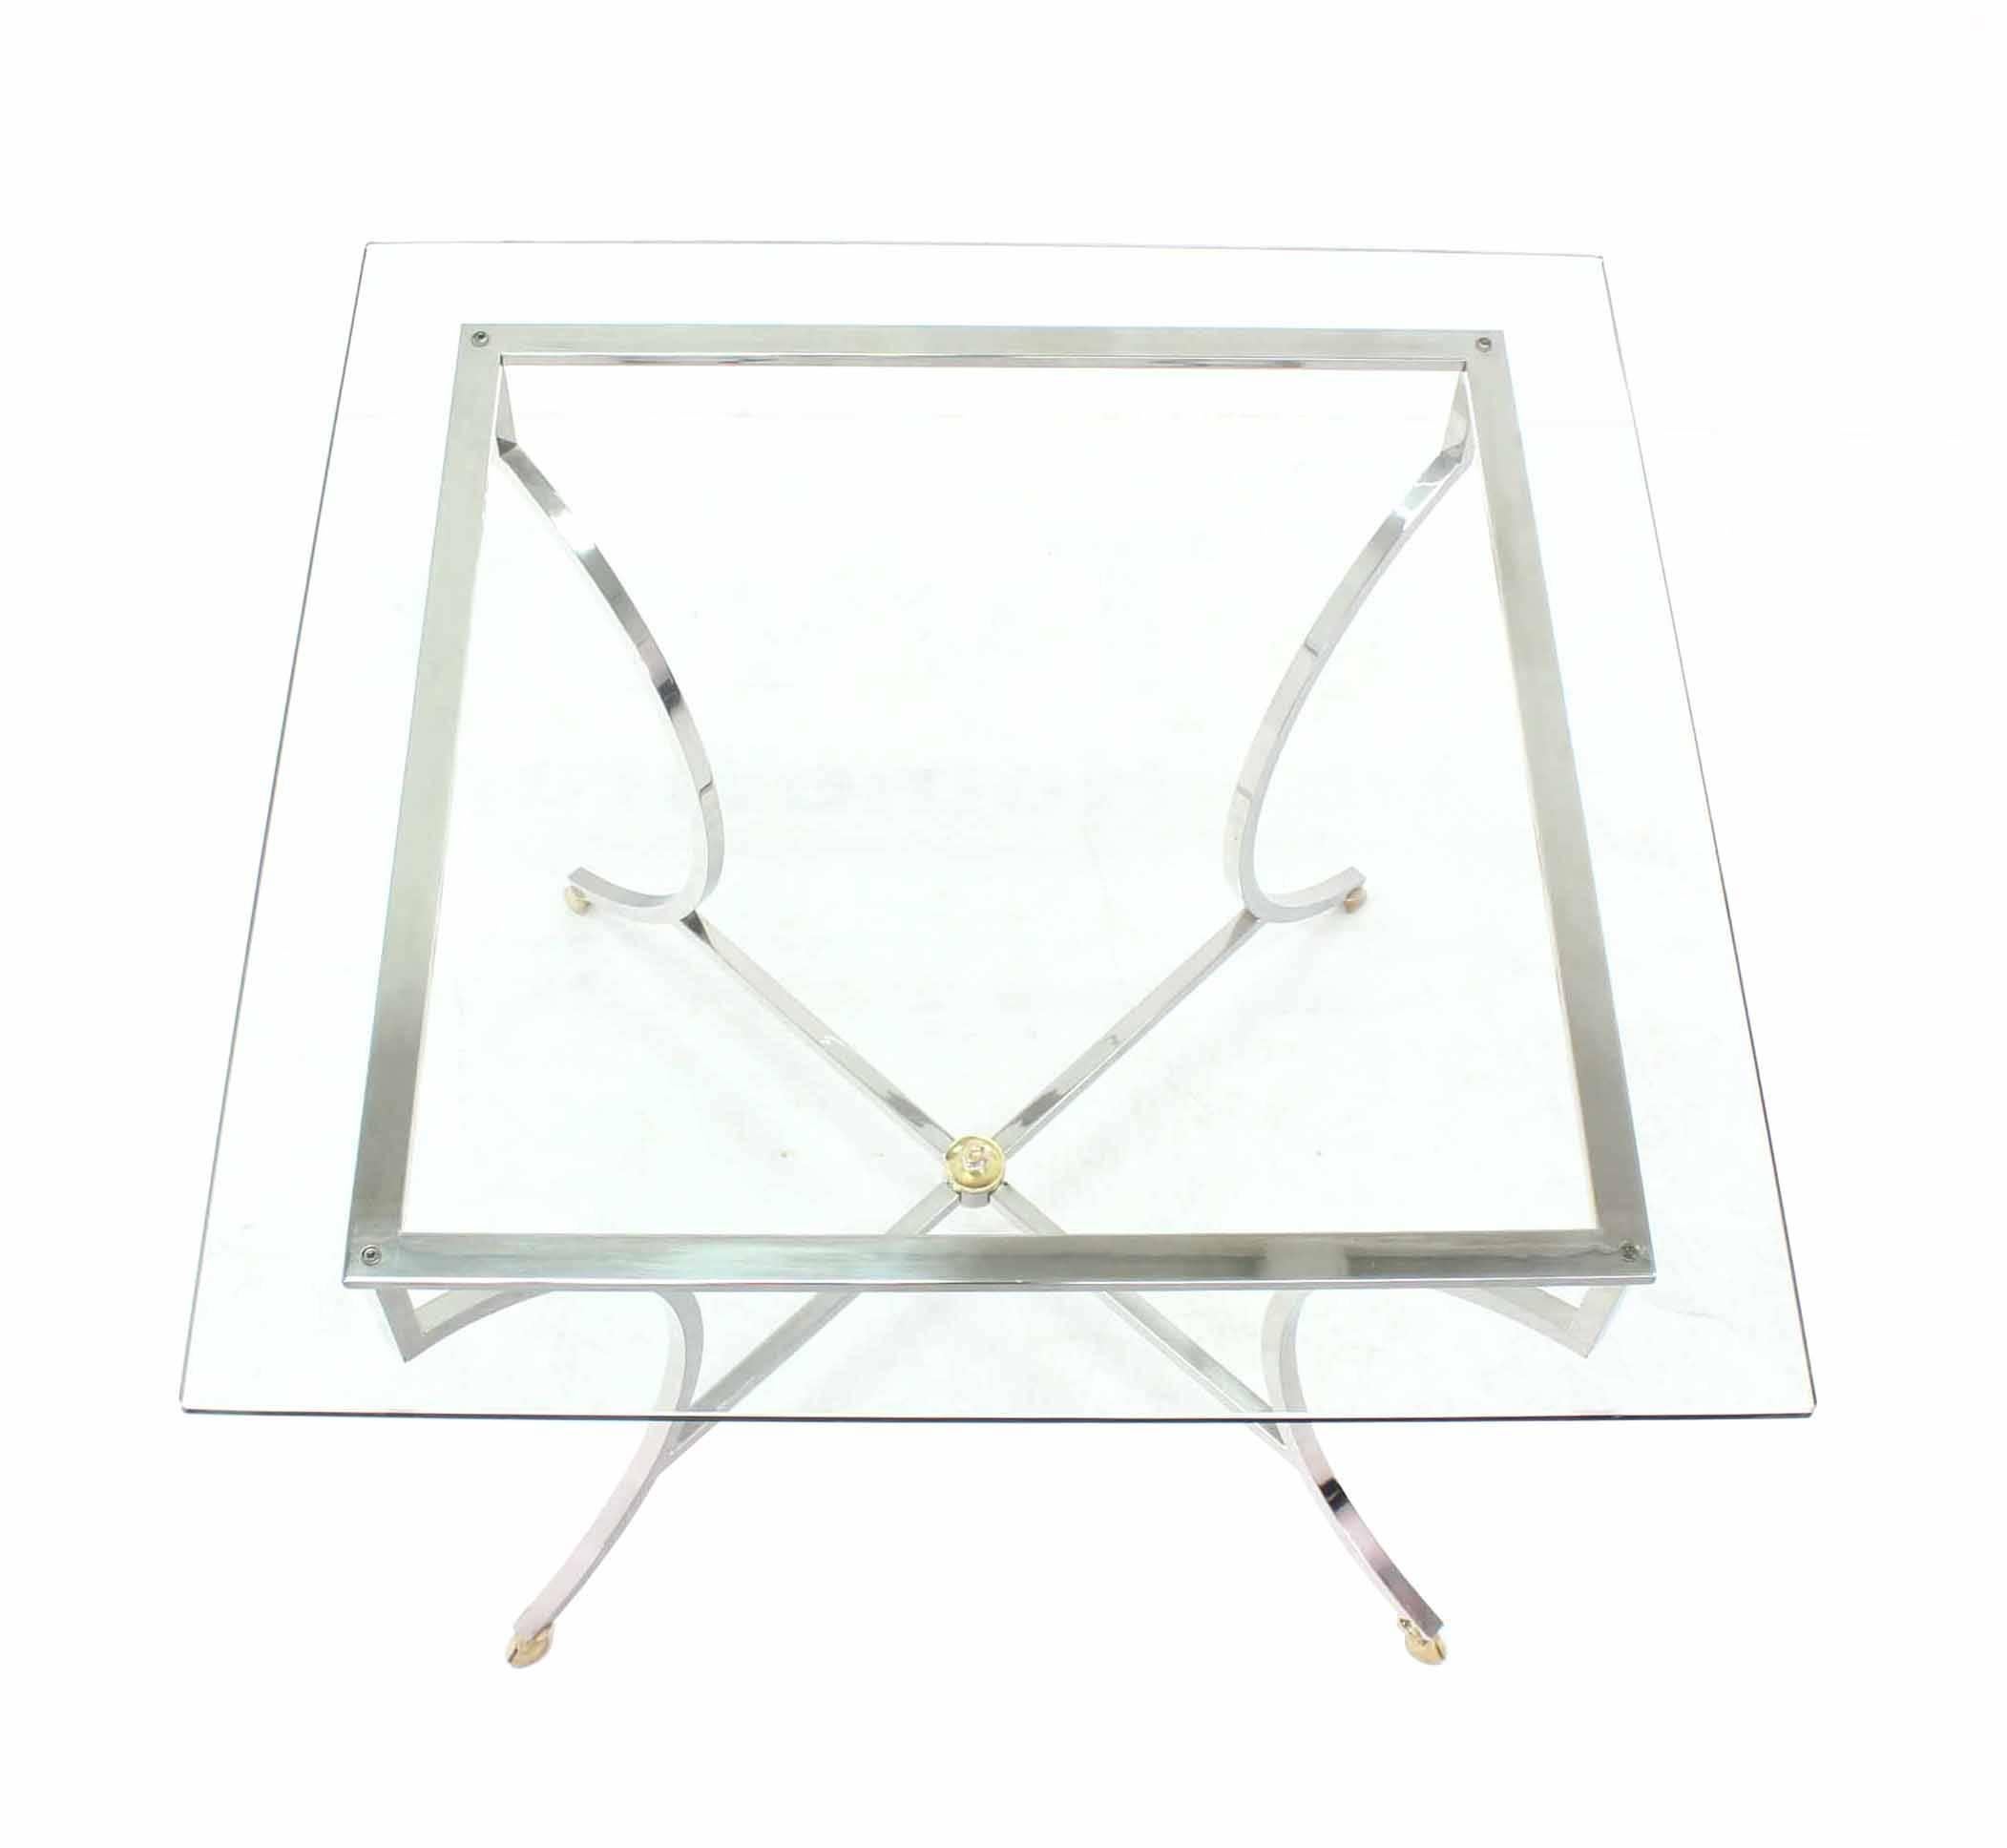 20th Century Brass Hoof Feet Chrome Glass Top Square Game Table For Sale